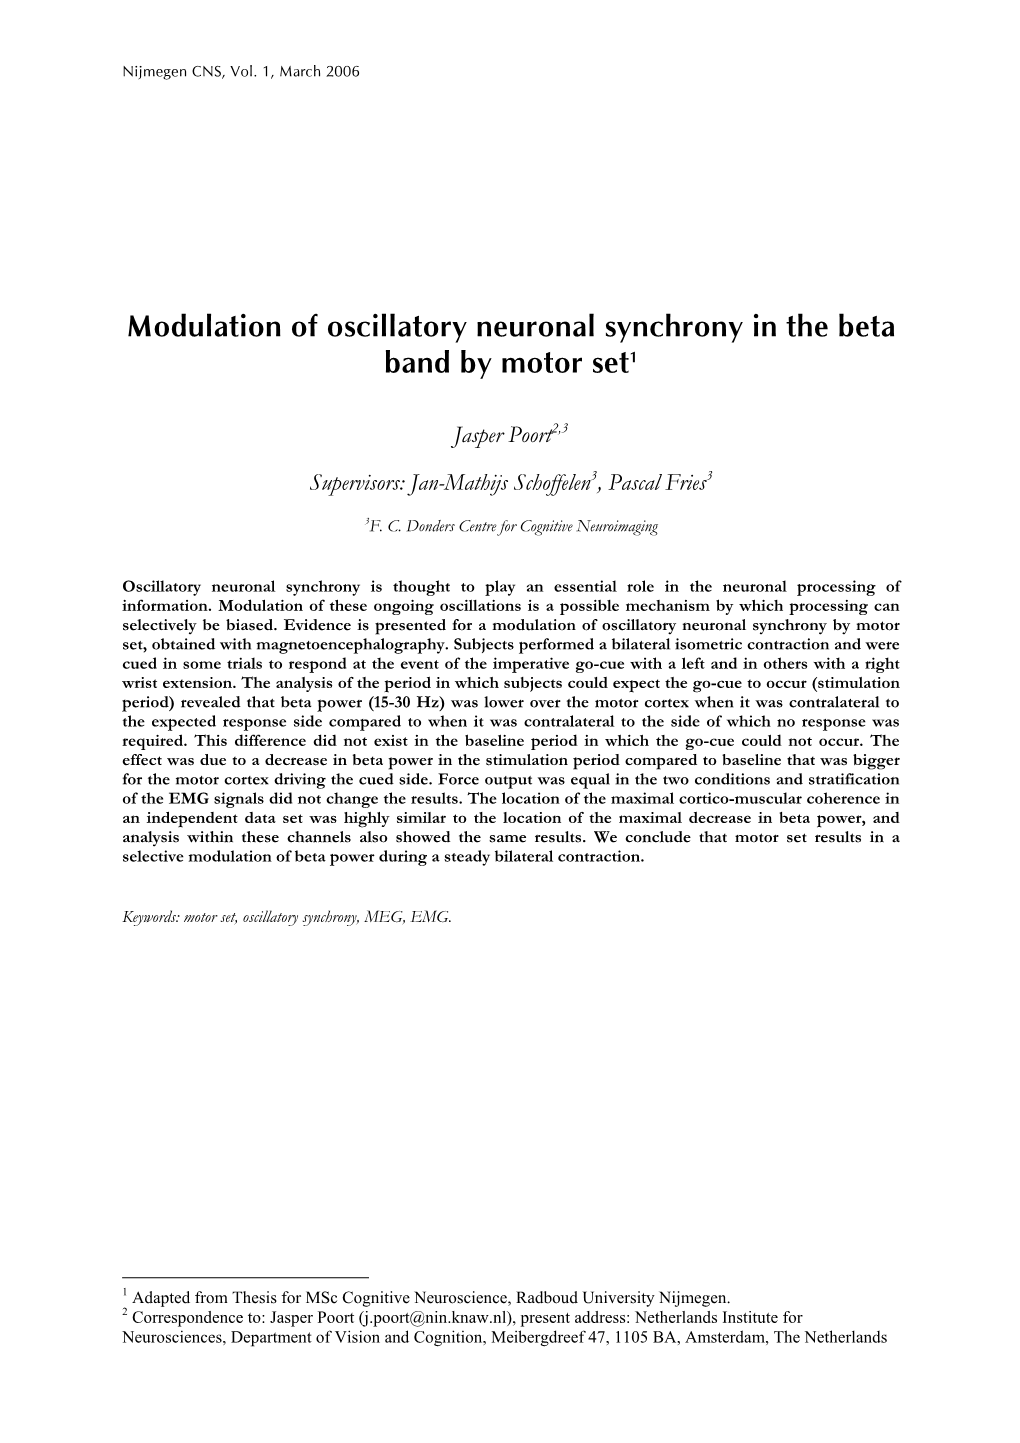 Modulation of Oscillatory Neuronal Synchrony in the Beta Band by Motor Set1